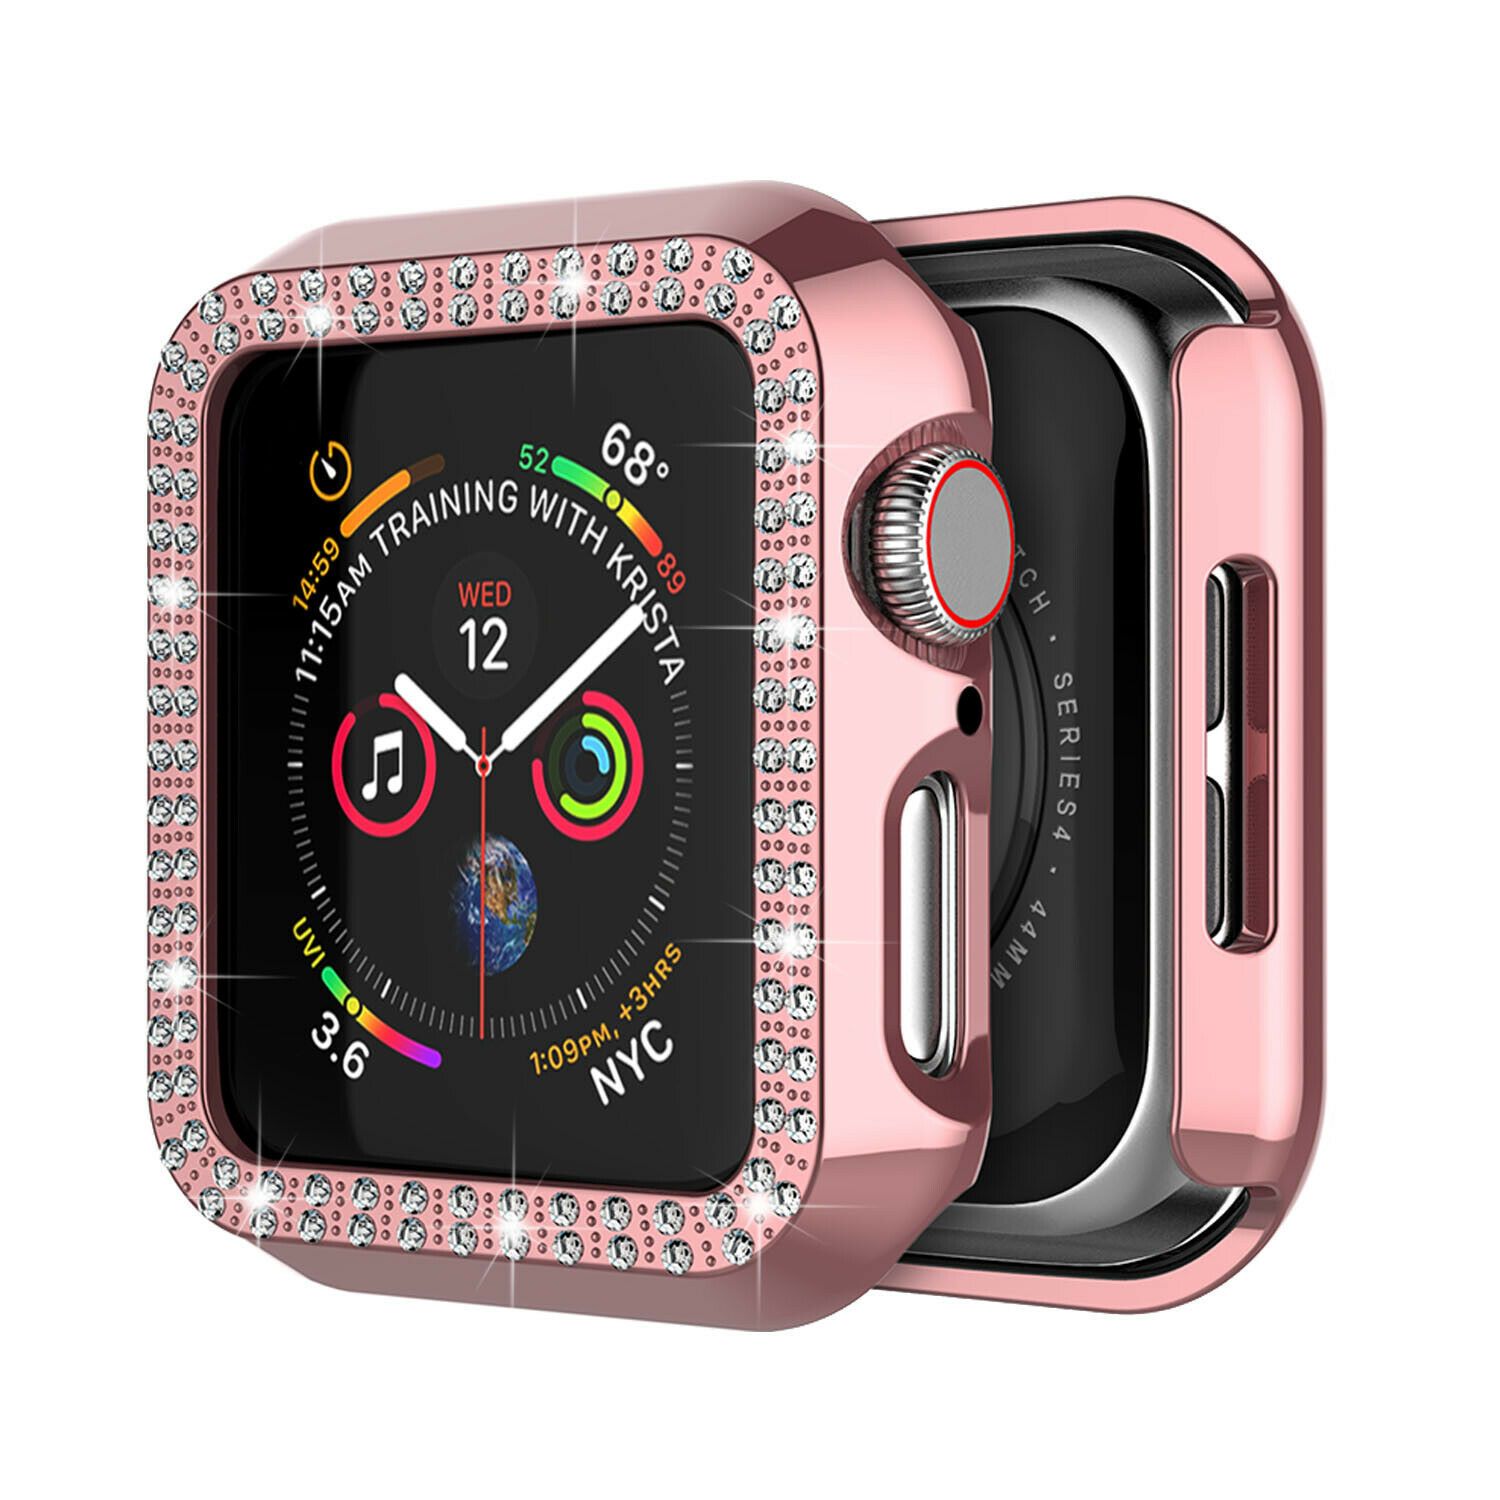 Crystal Diamond Protector Case Cover for Apple Watch 38/40/42/44 mm Series 5/4/3 ebizware Rose Gold 38mm (Series 3/2/1) 